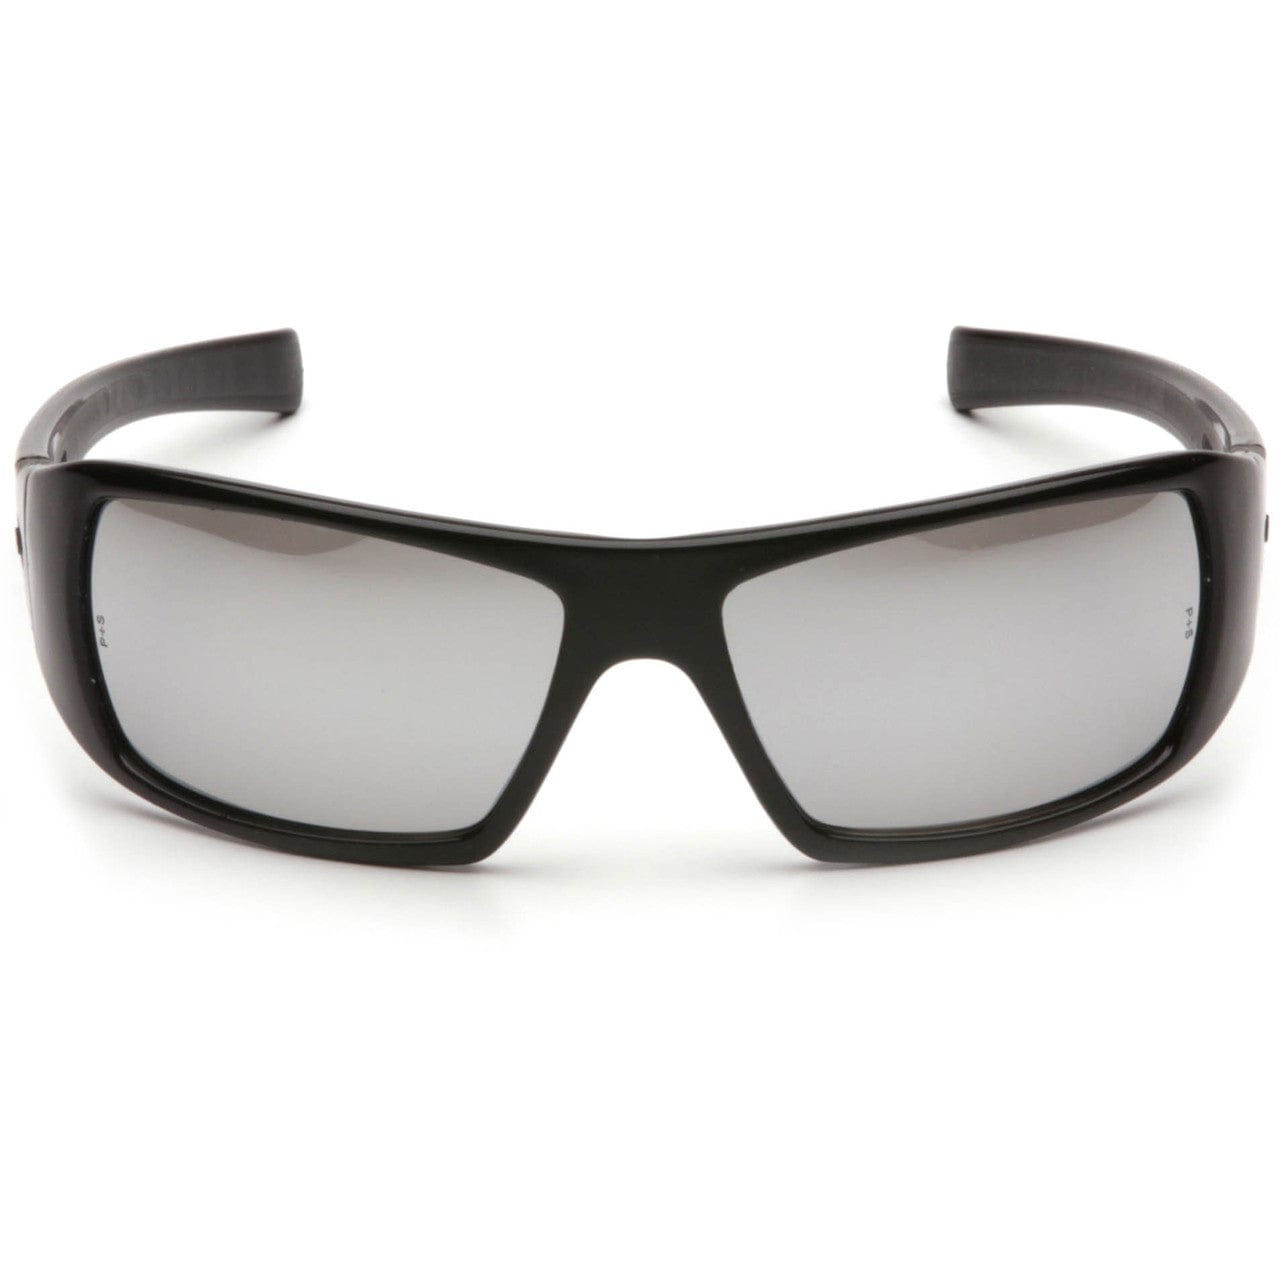 Pyramex Goliath Safety Glasses with Silver Mirror Lens